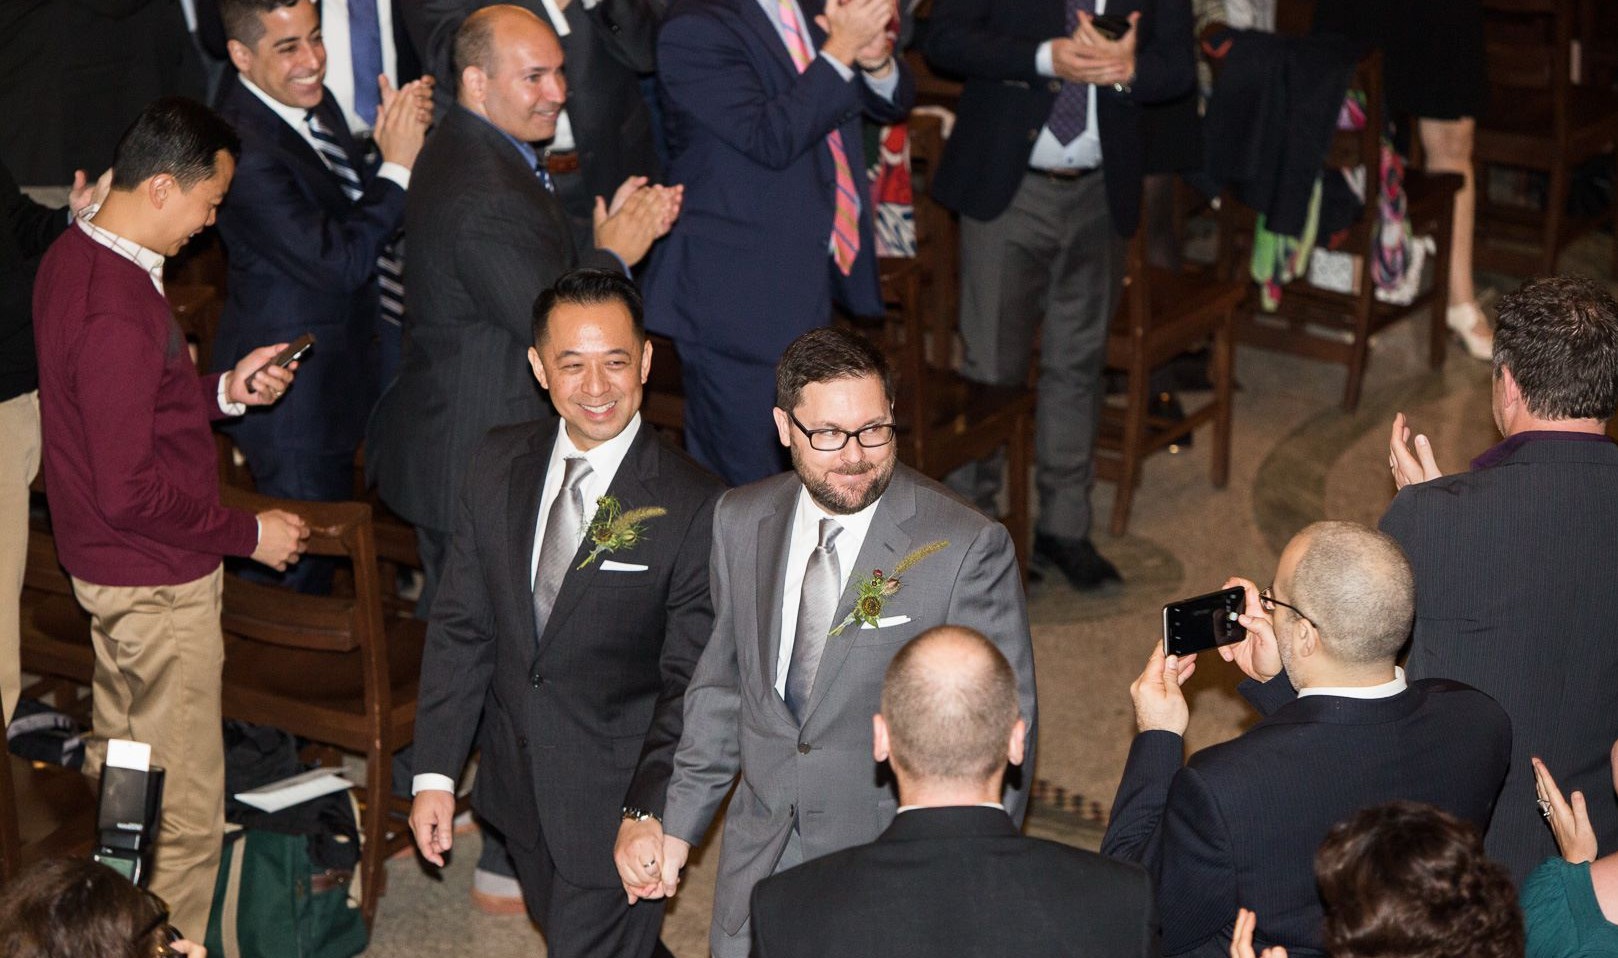 Our happy grooms making their way back down the aisle at Saint Paul's Chapel.